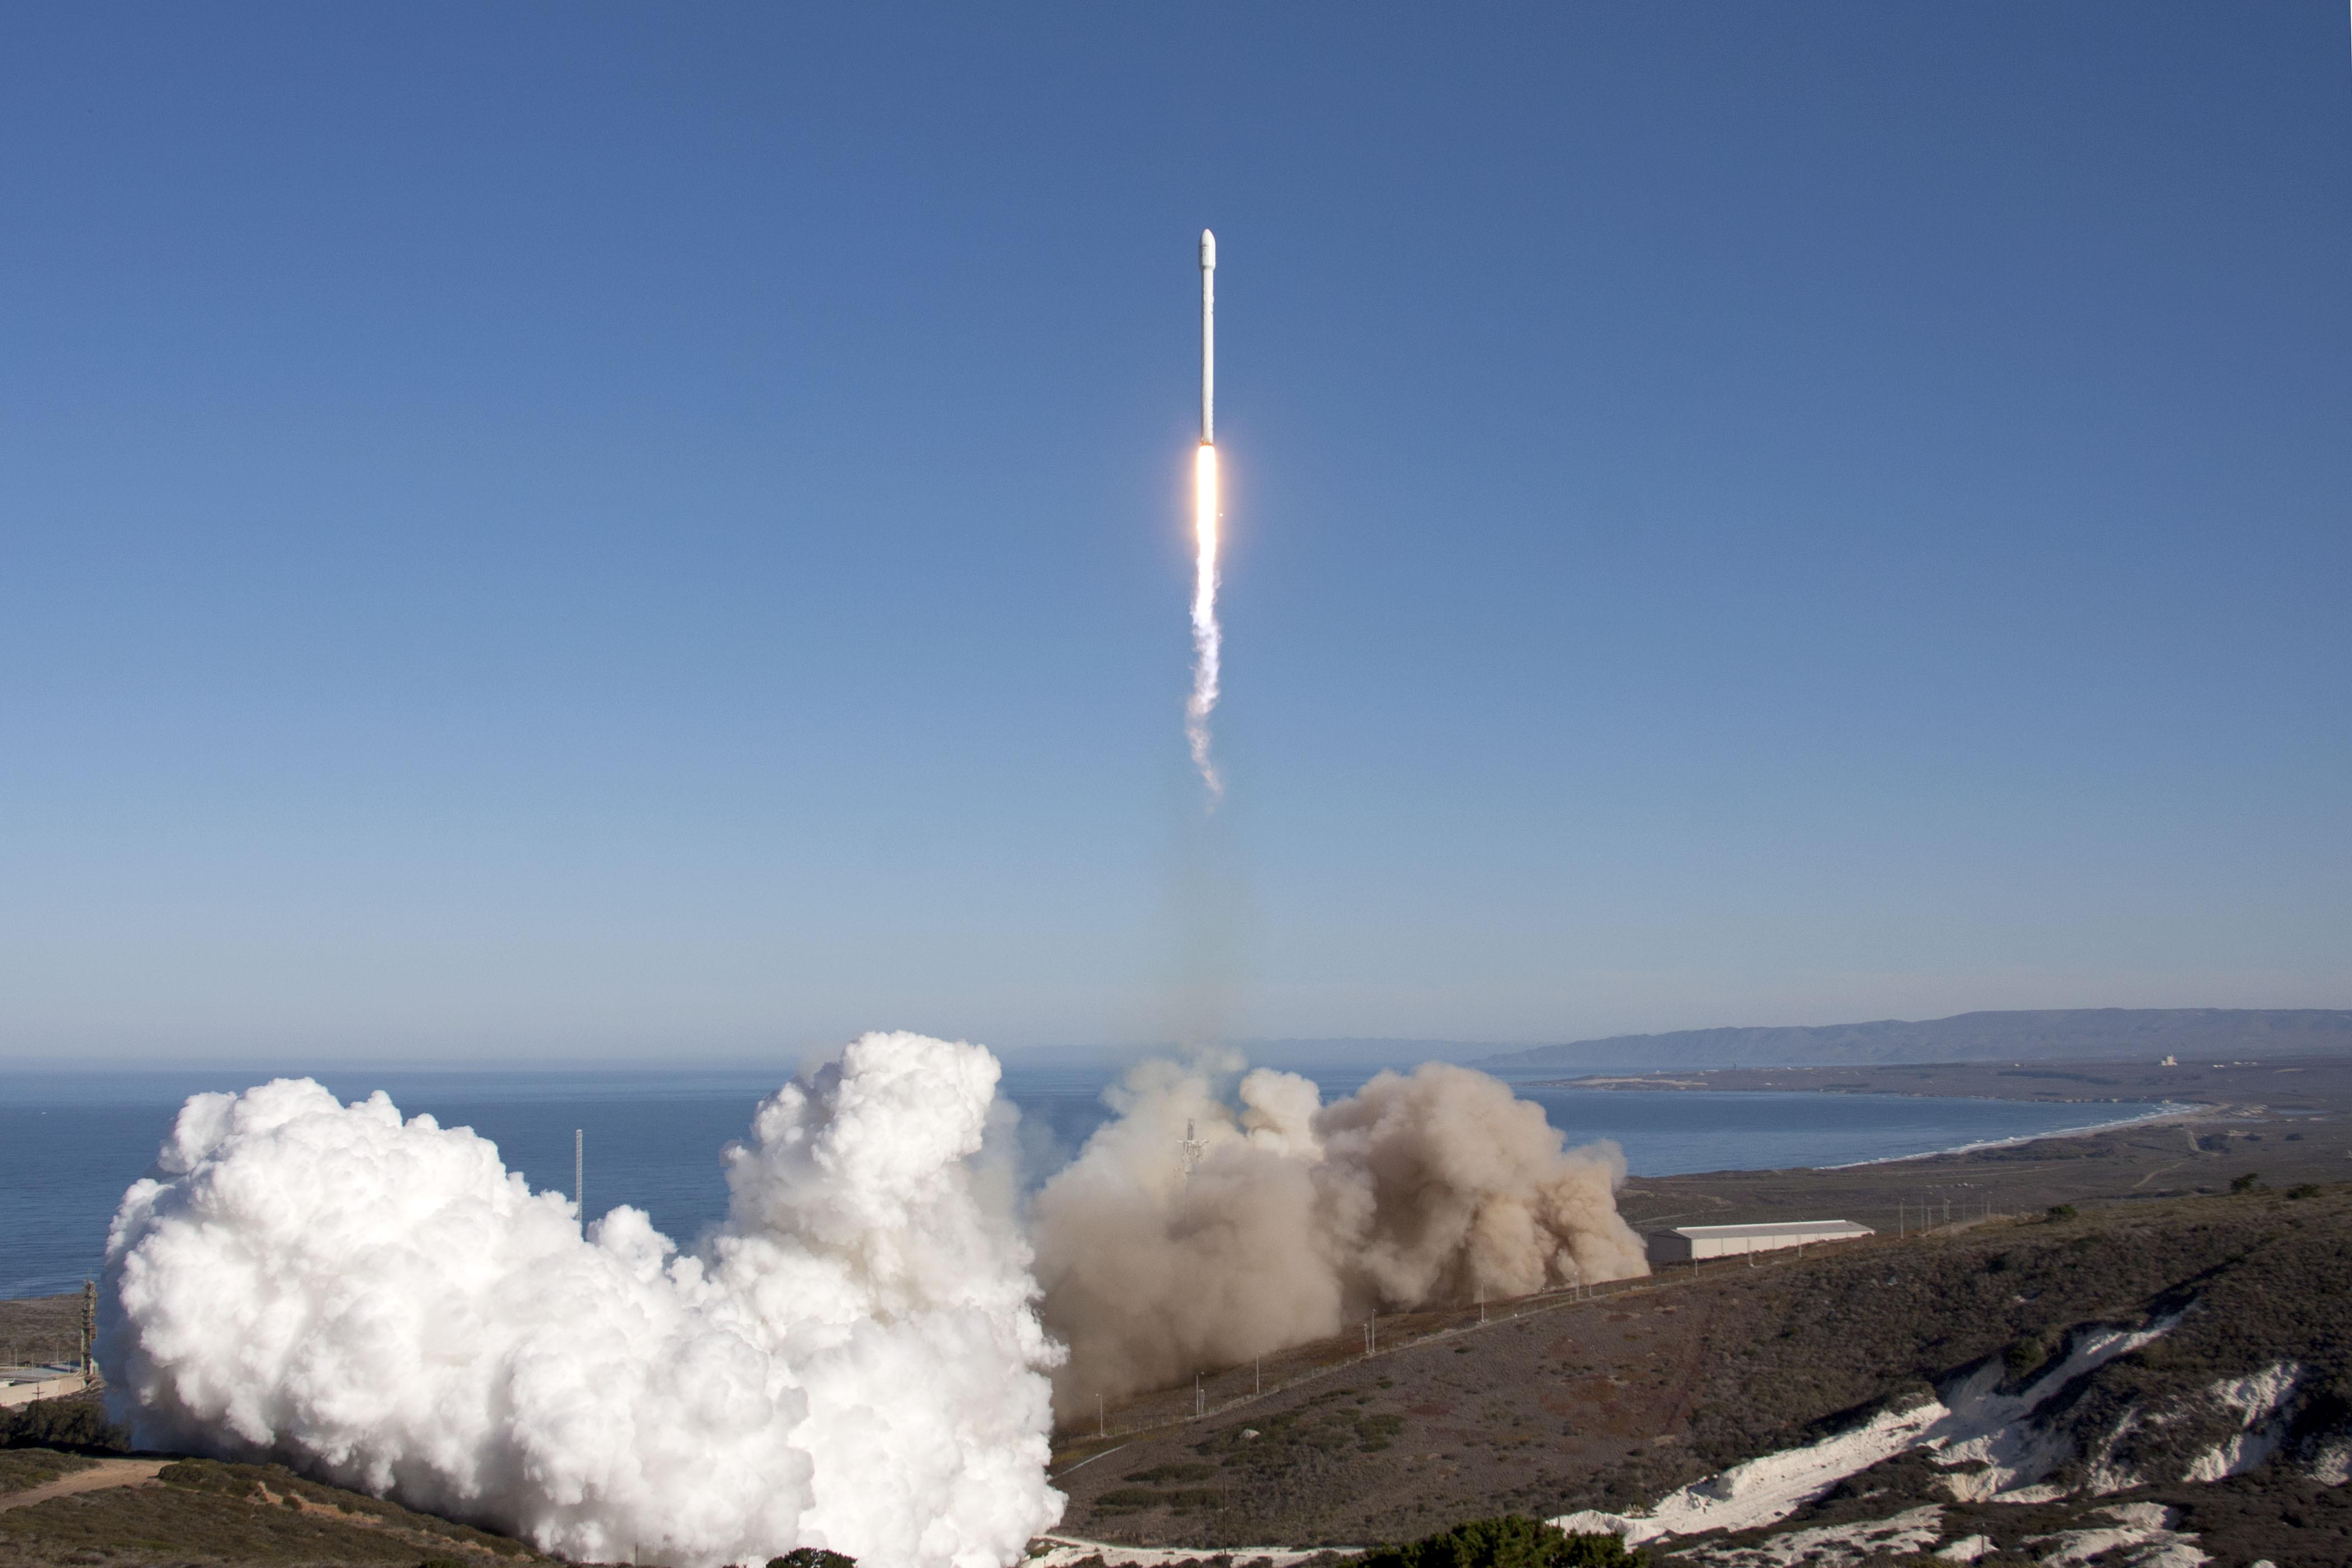 SpaceX launches upgraded Falcon 9 rocket. Space News, Commercial